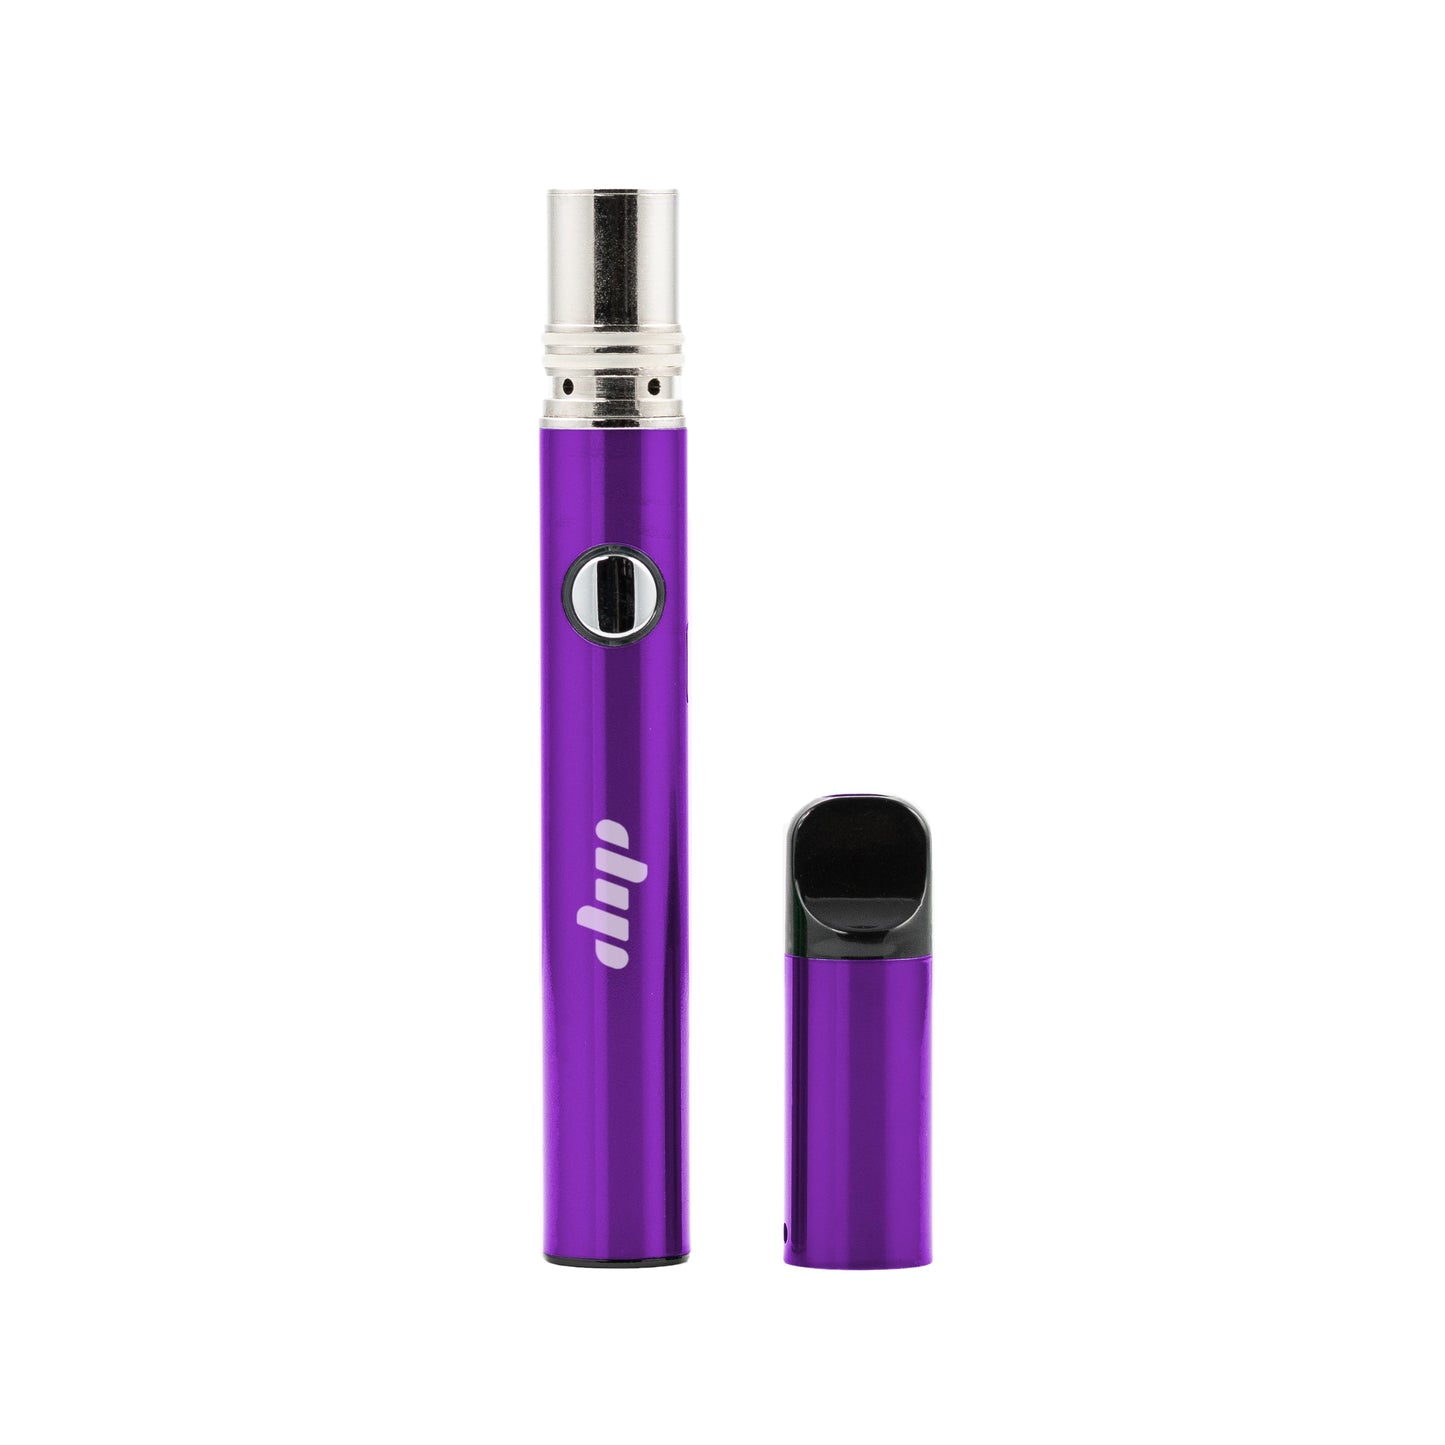 Purple vape pen with airflow technology for dabbing.